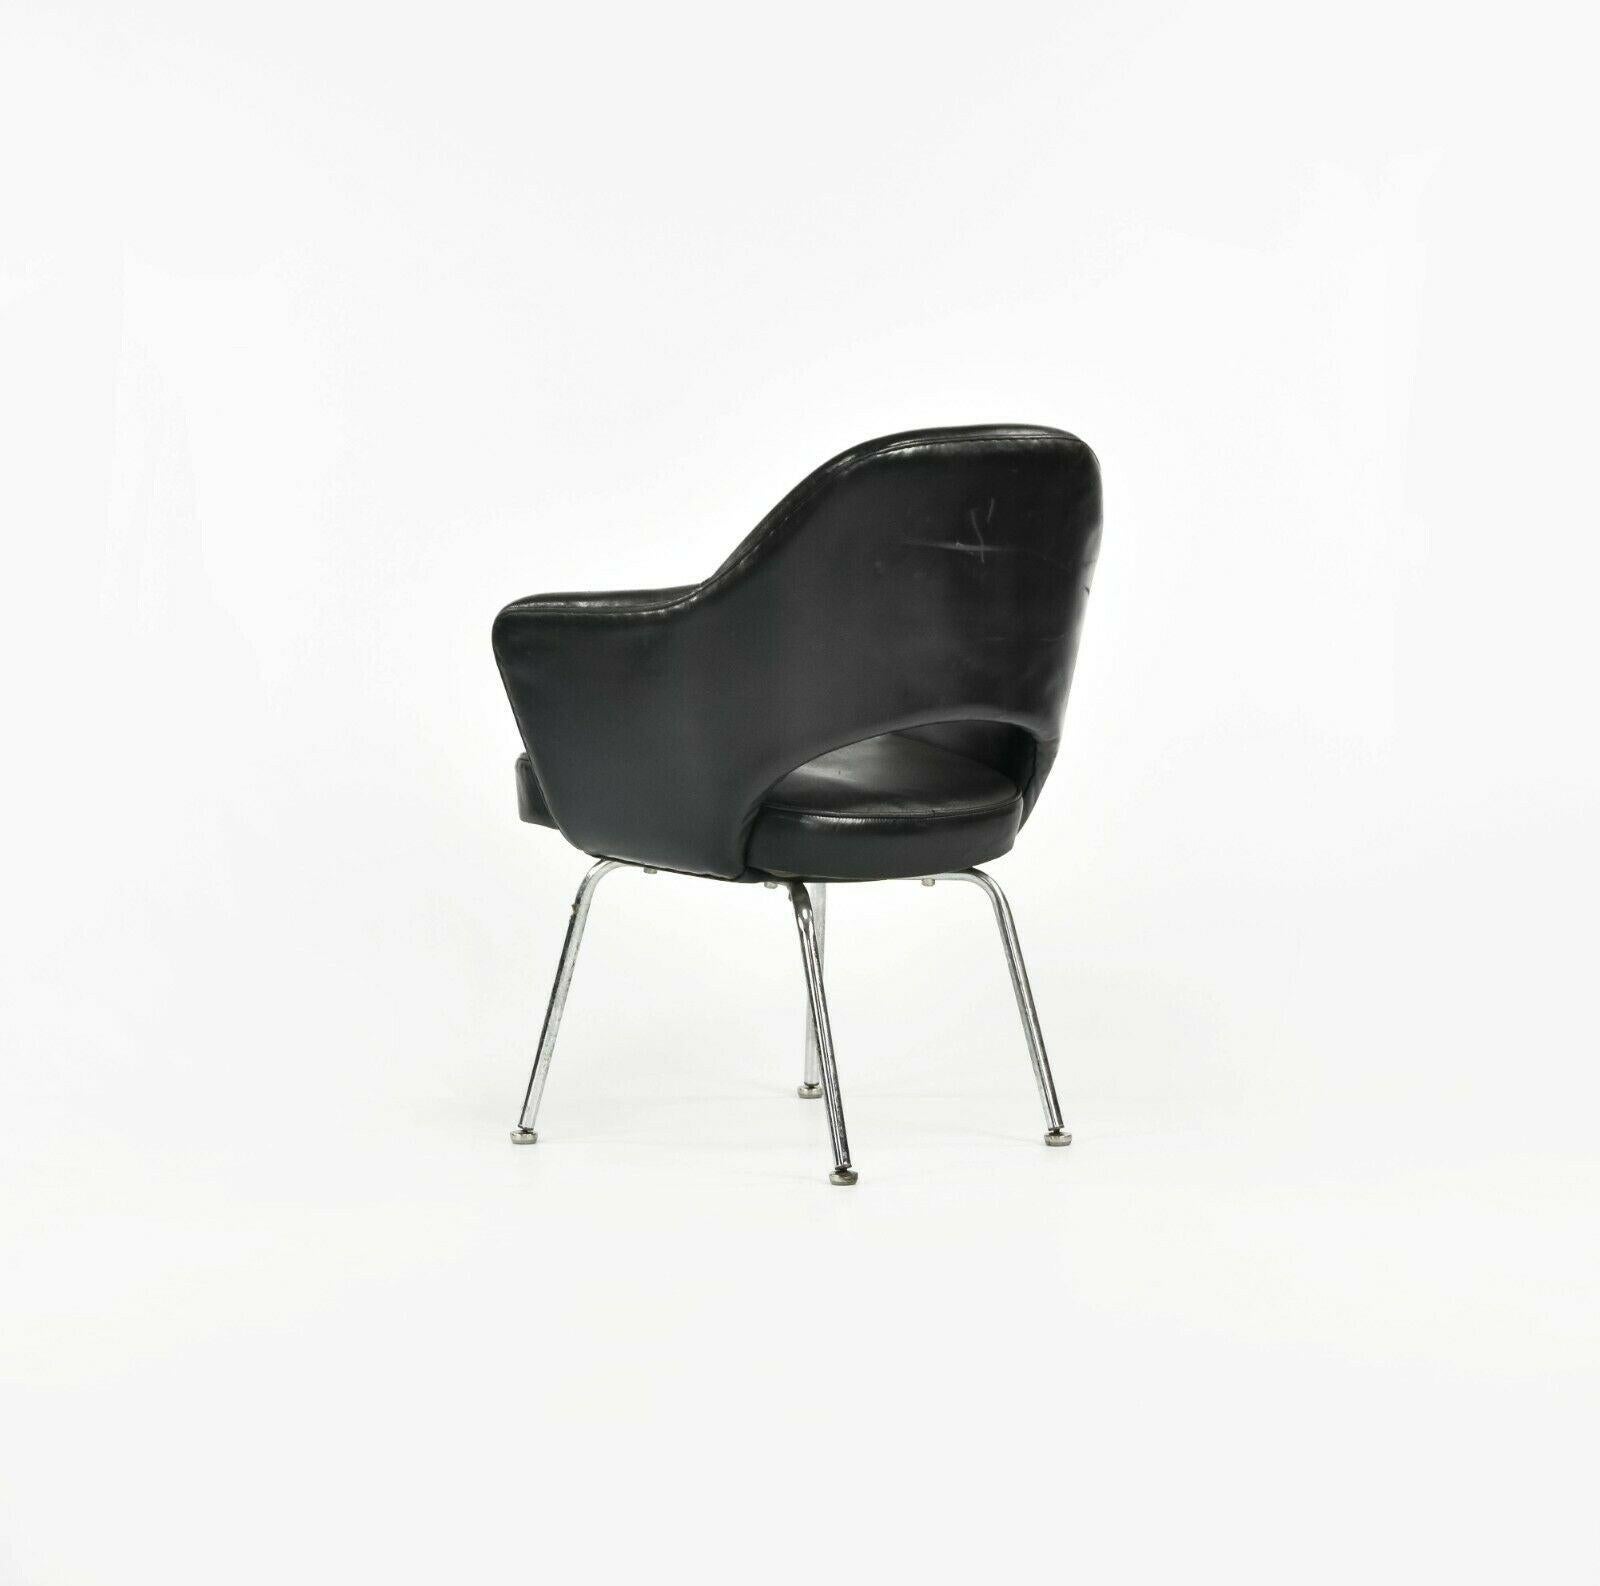 Mid-20th Century 1960s Eero Saarinen for Knoll Executive Dining Arm Chair in Black Leather For Sale